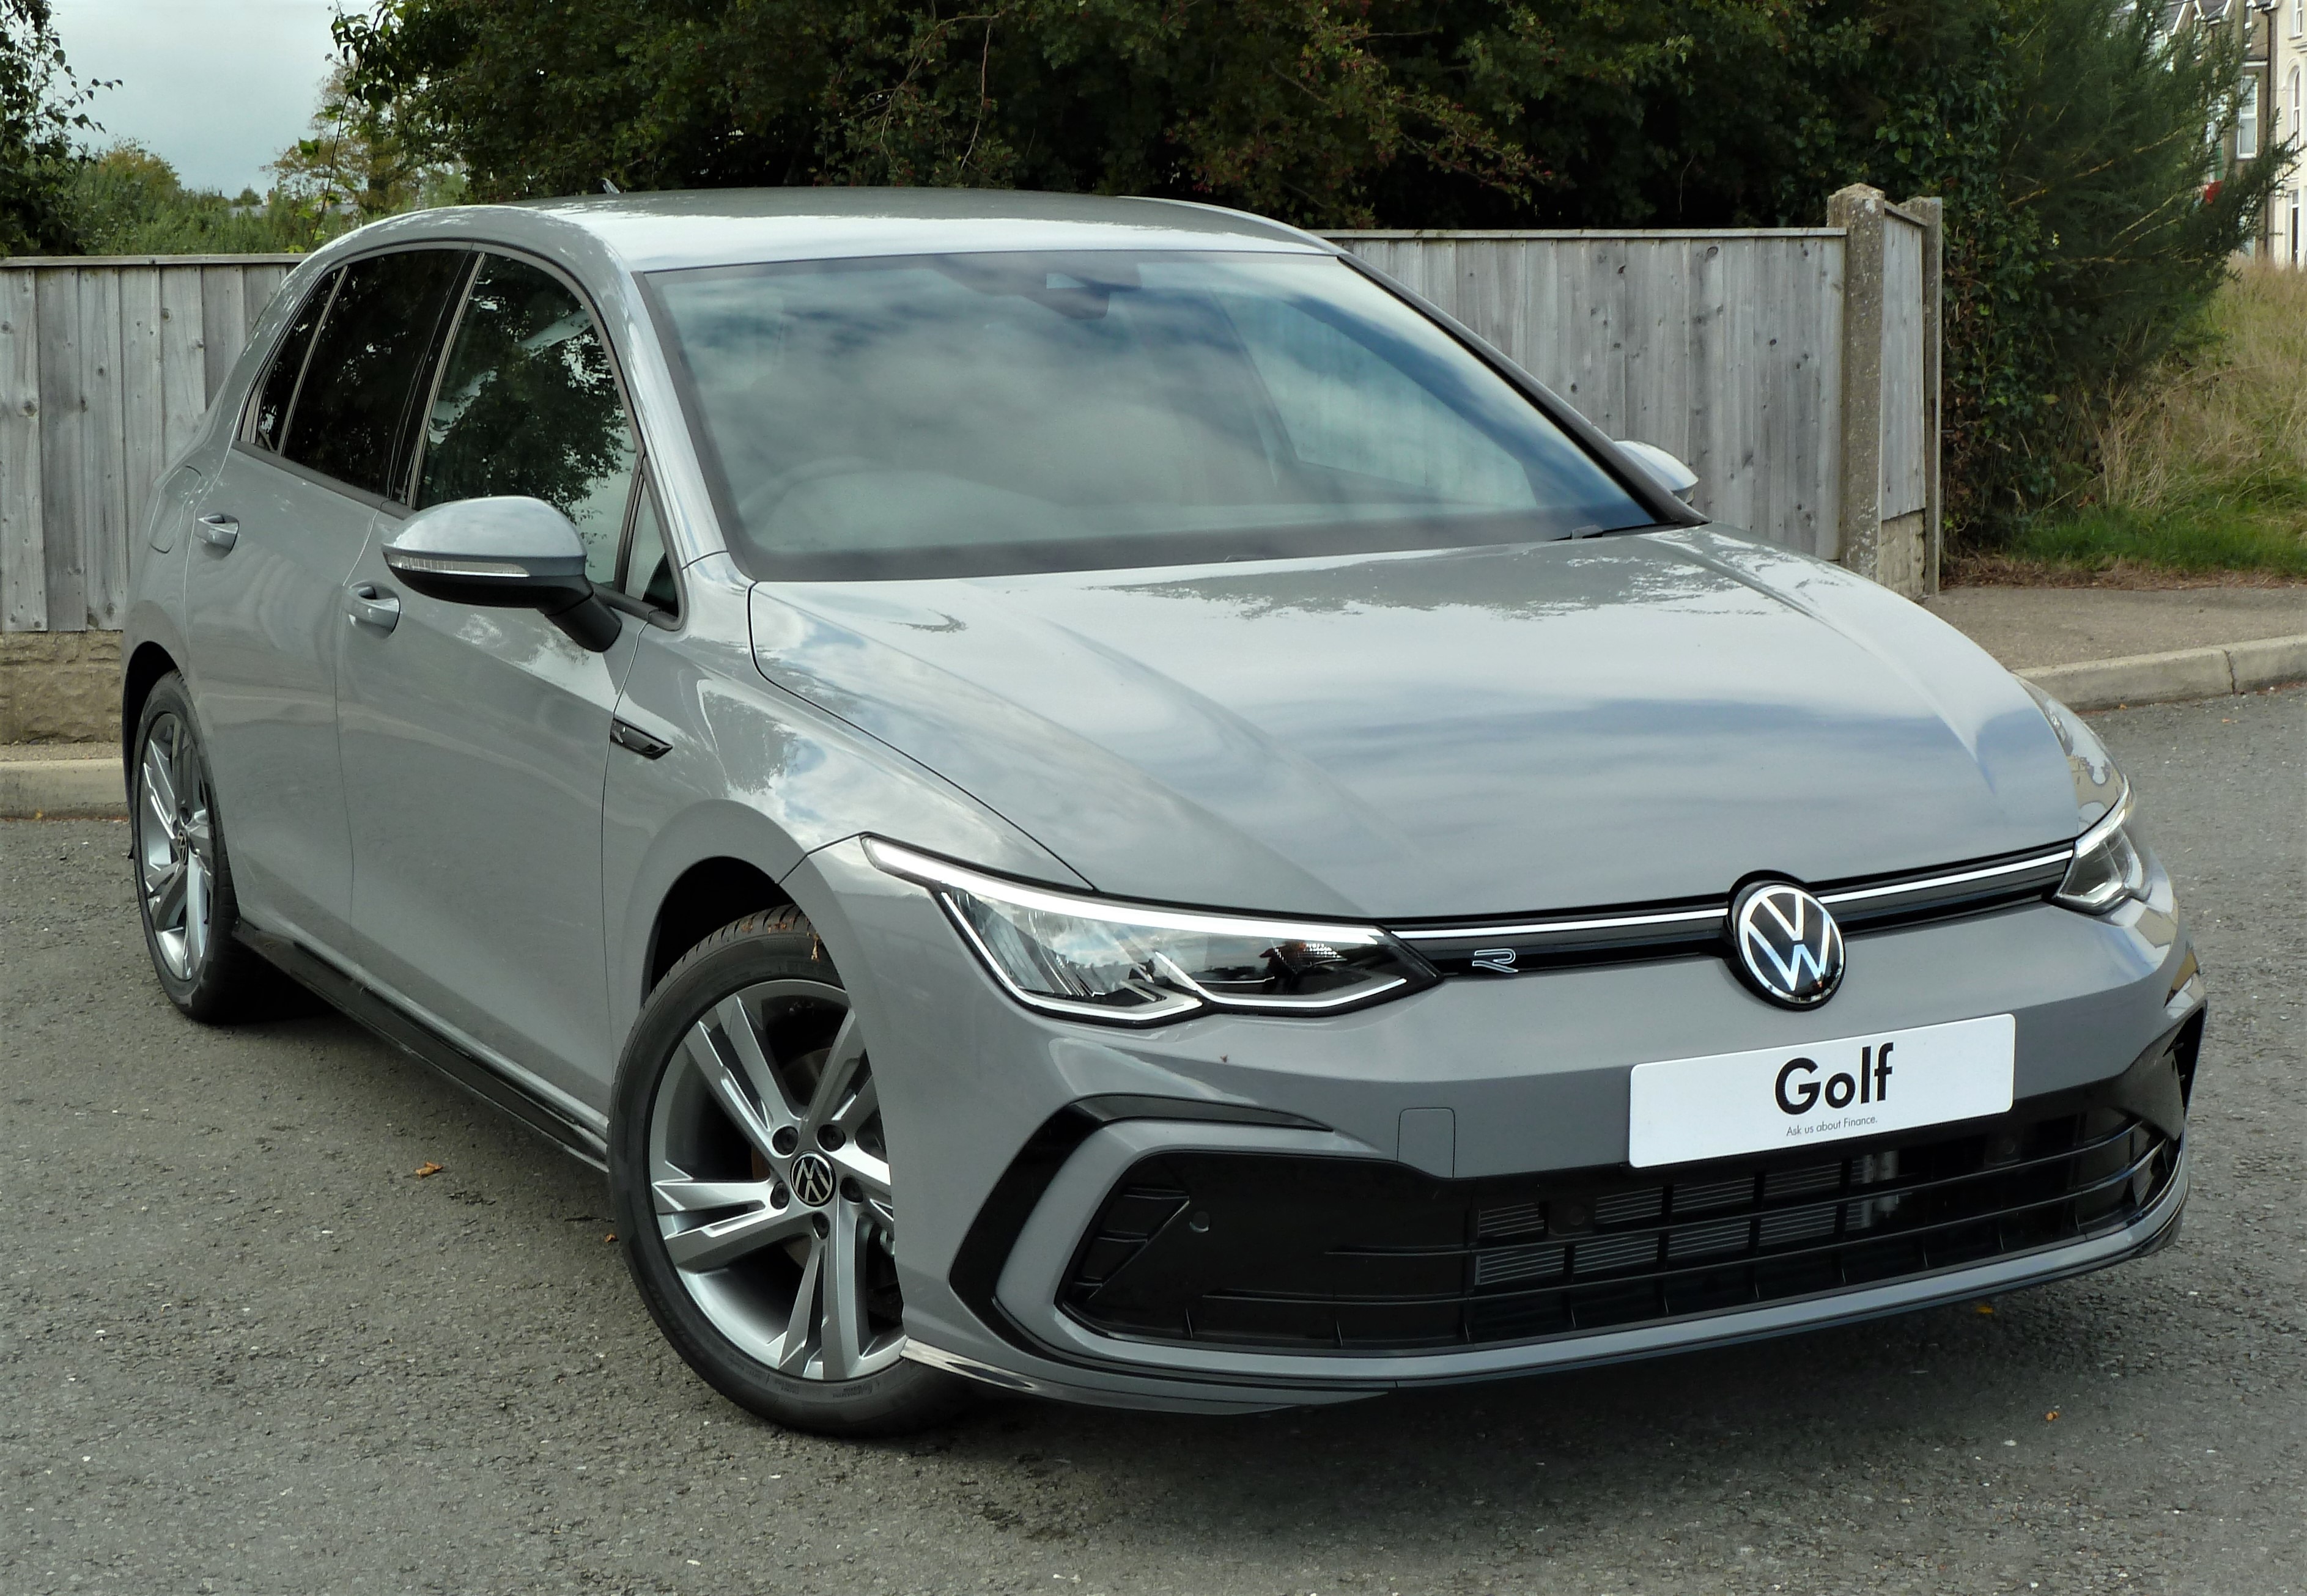 Golf R-Line eTSI available from stock